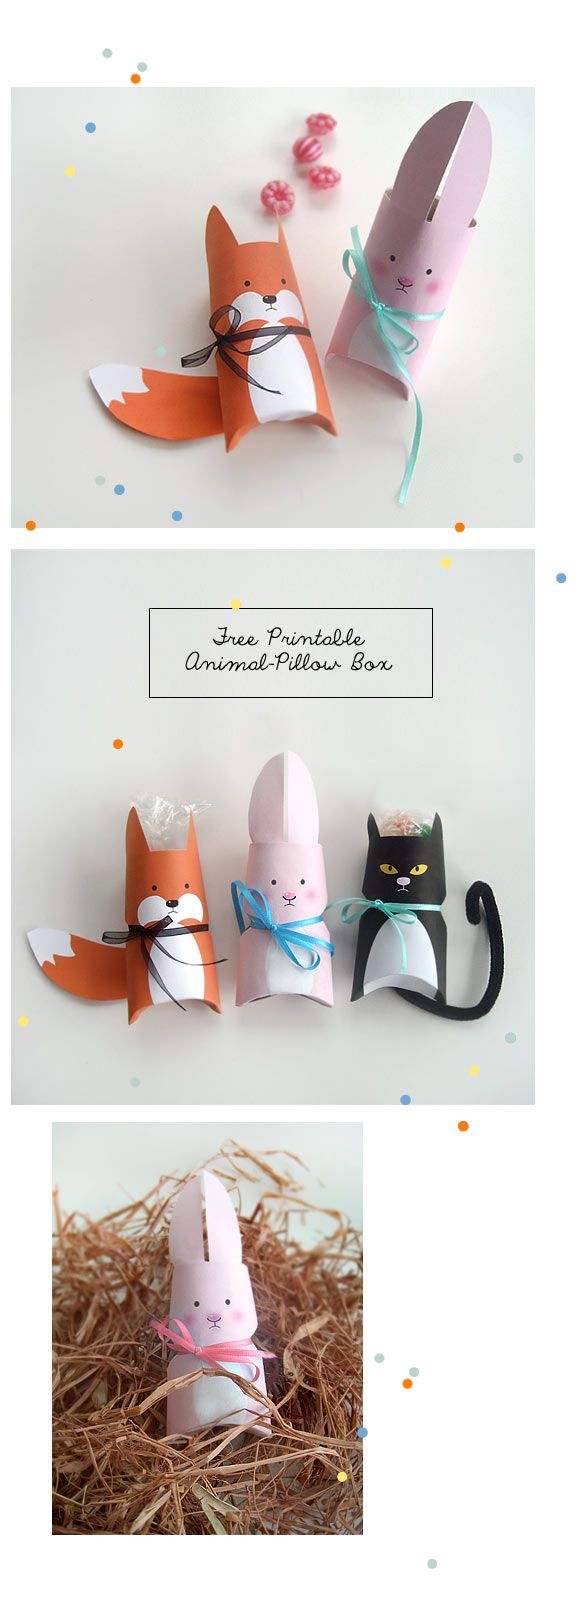 Klorollentiere inkl. pdf-Download / Animal pillow boxes made of toilet paper rol...